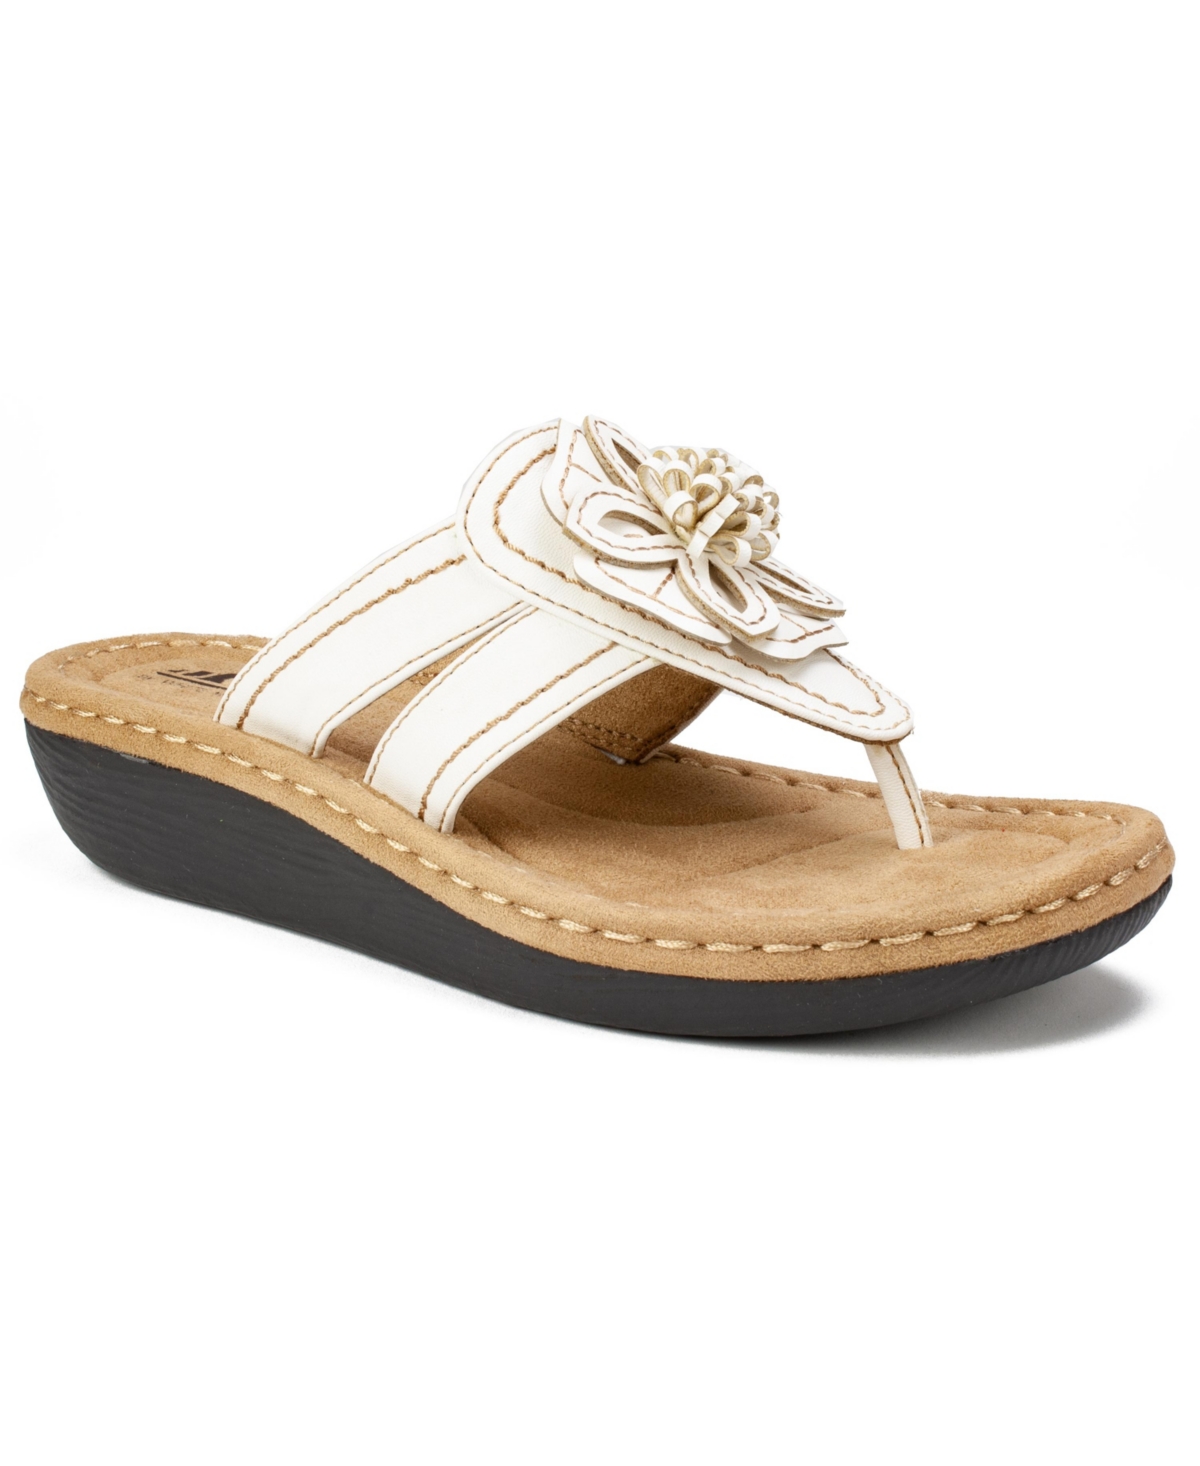 Carnation Comfort Thong Sandals - White Leather